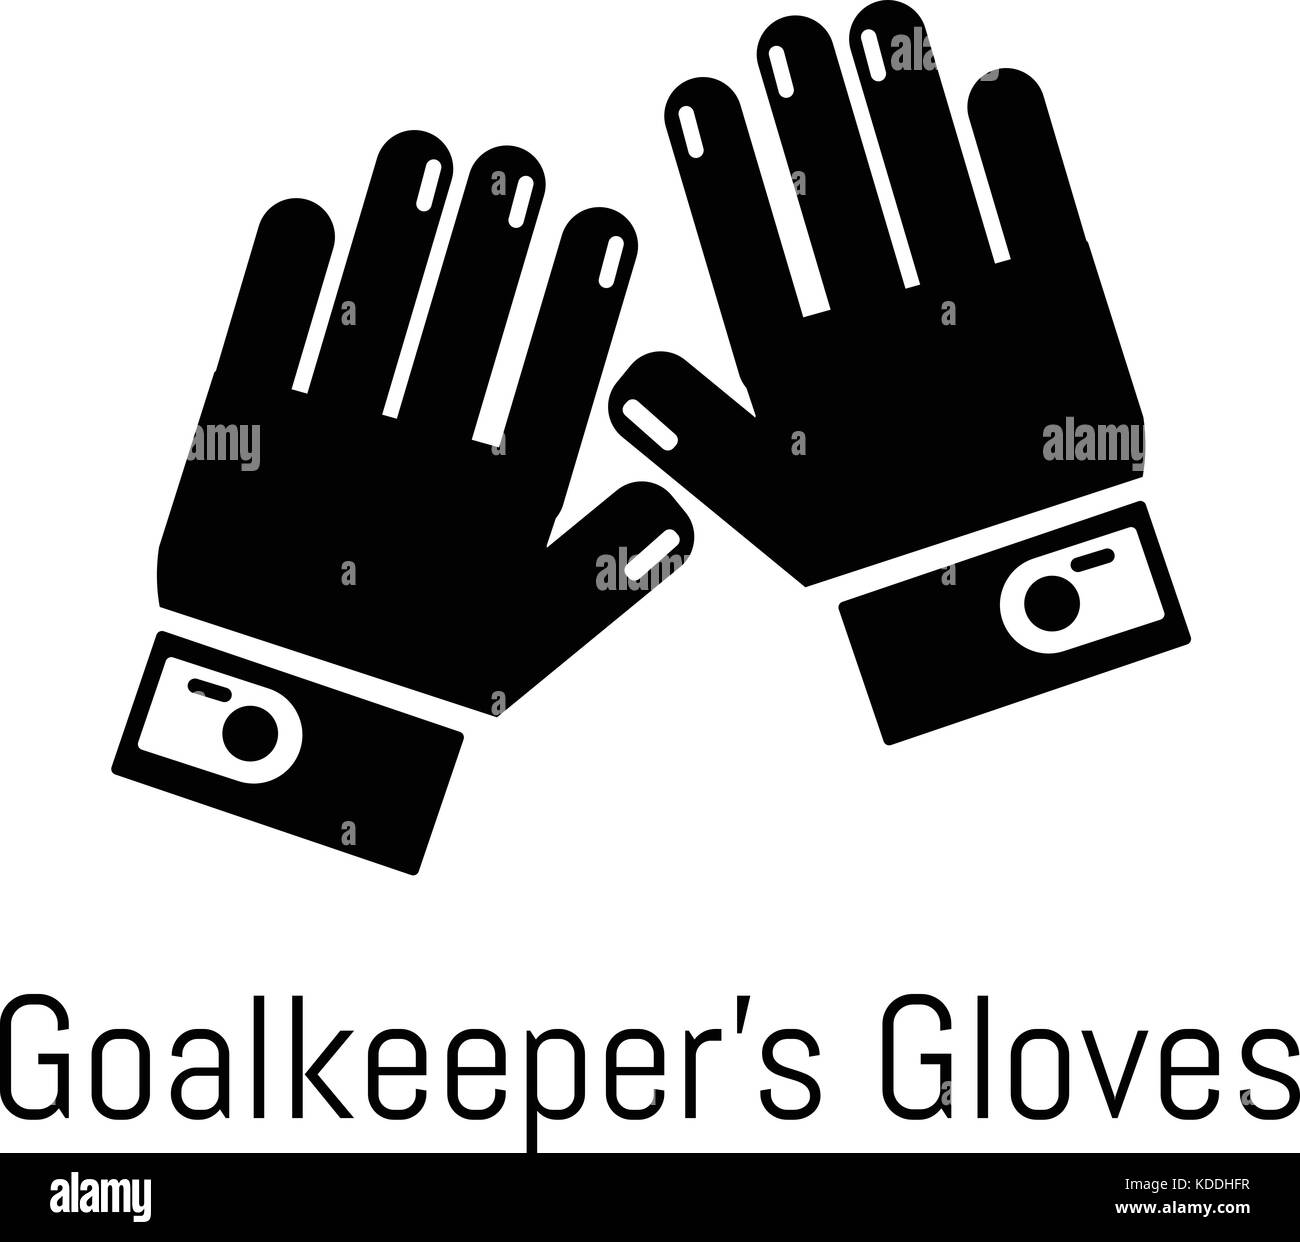 Goalkeeper gloves icon, simple black style Stock Vector